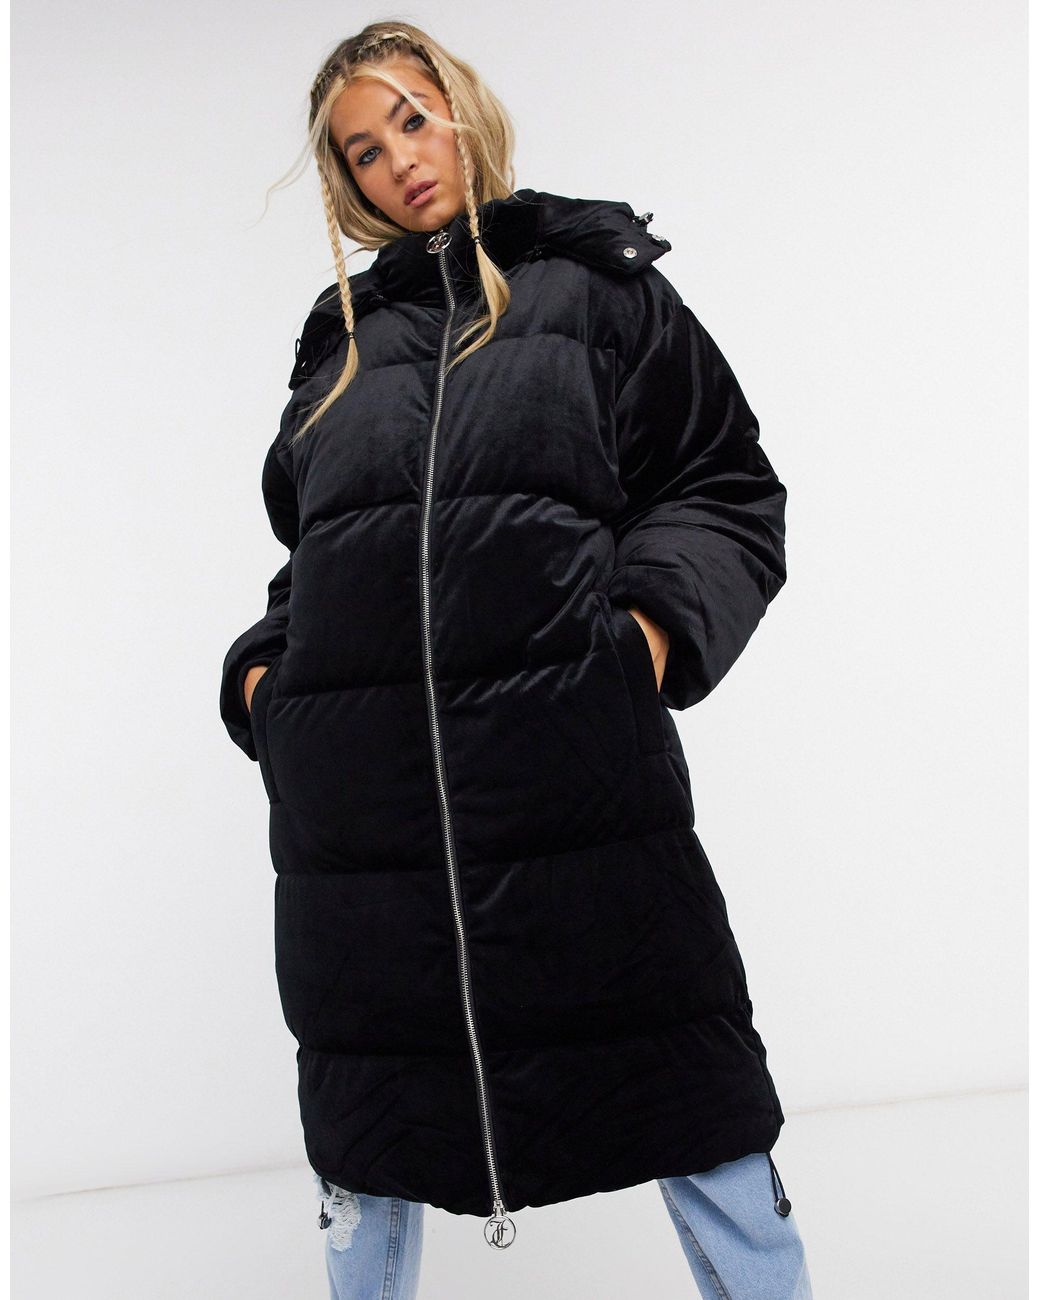 Juicy Couture Helena Puffer Coat in Black | Lyst